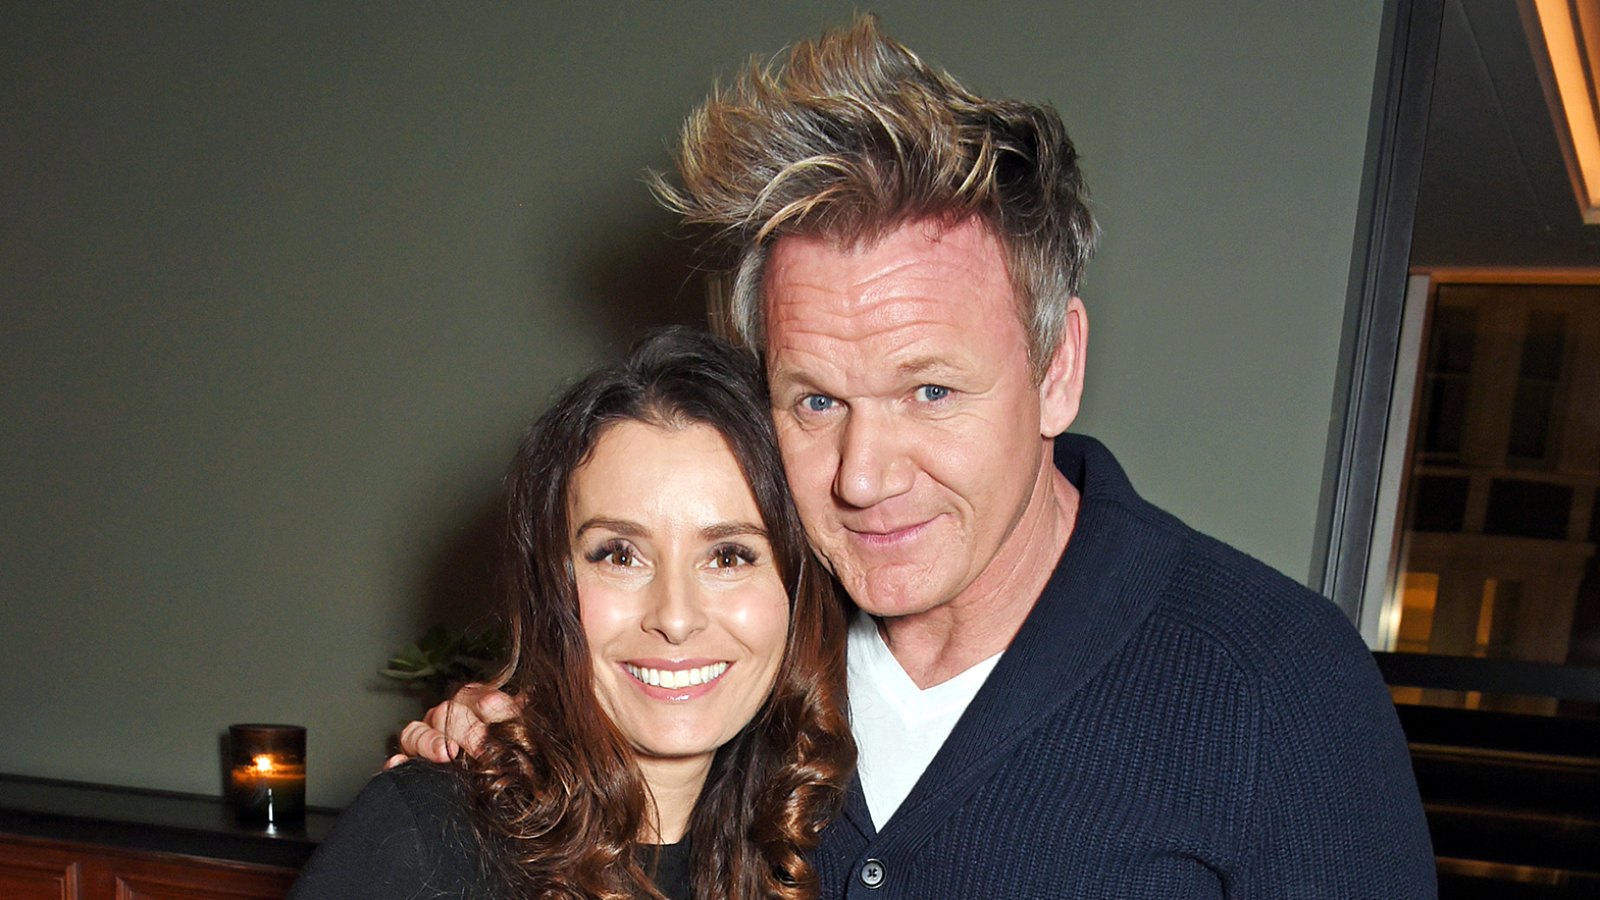 Gordon Ramsay lost weight to save marriage